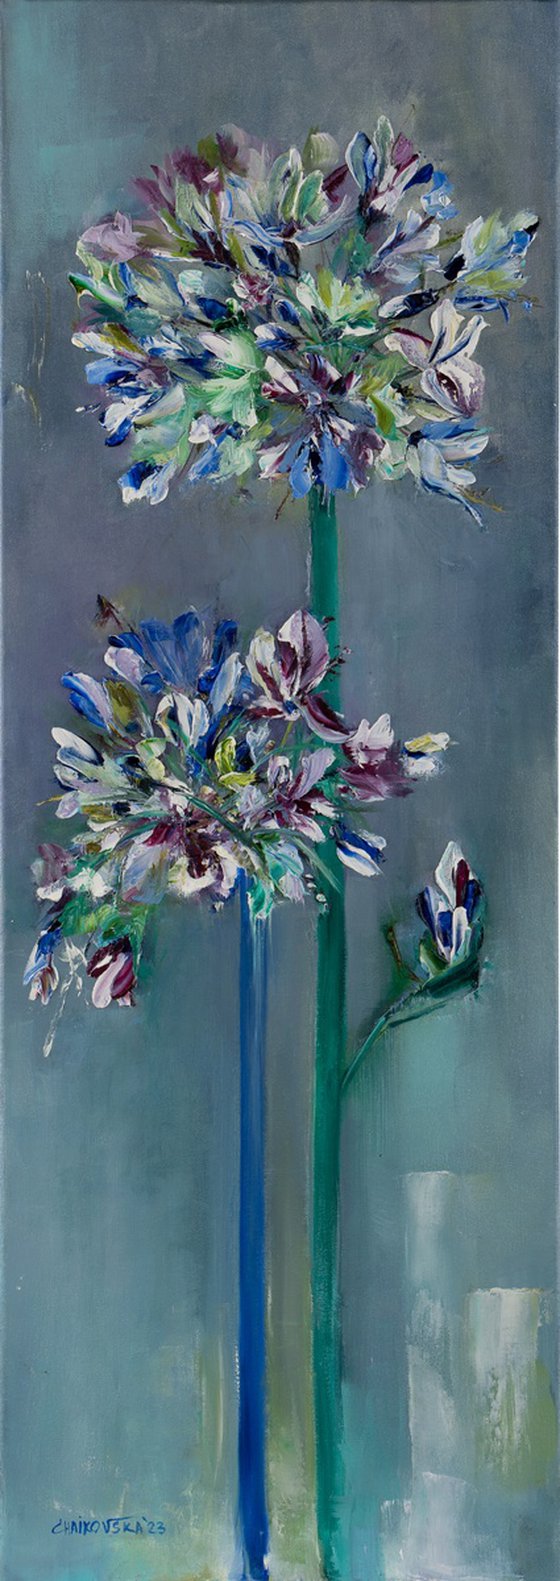 AGAPANTHUS, Oil on canvas panel